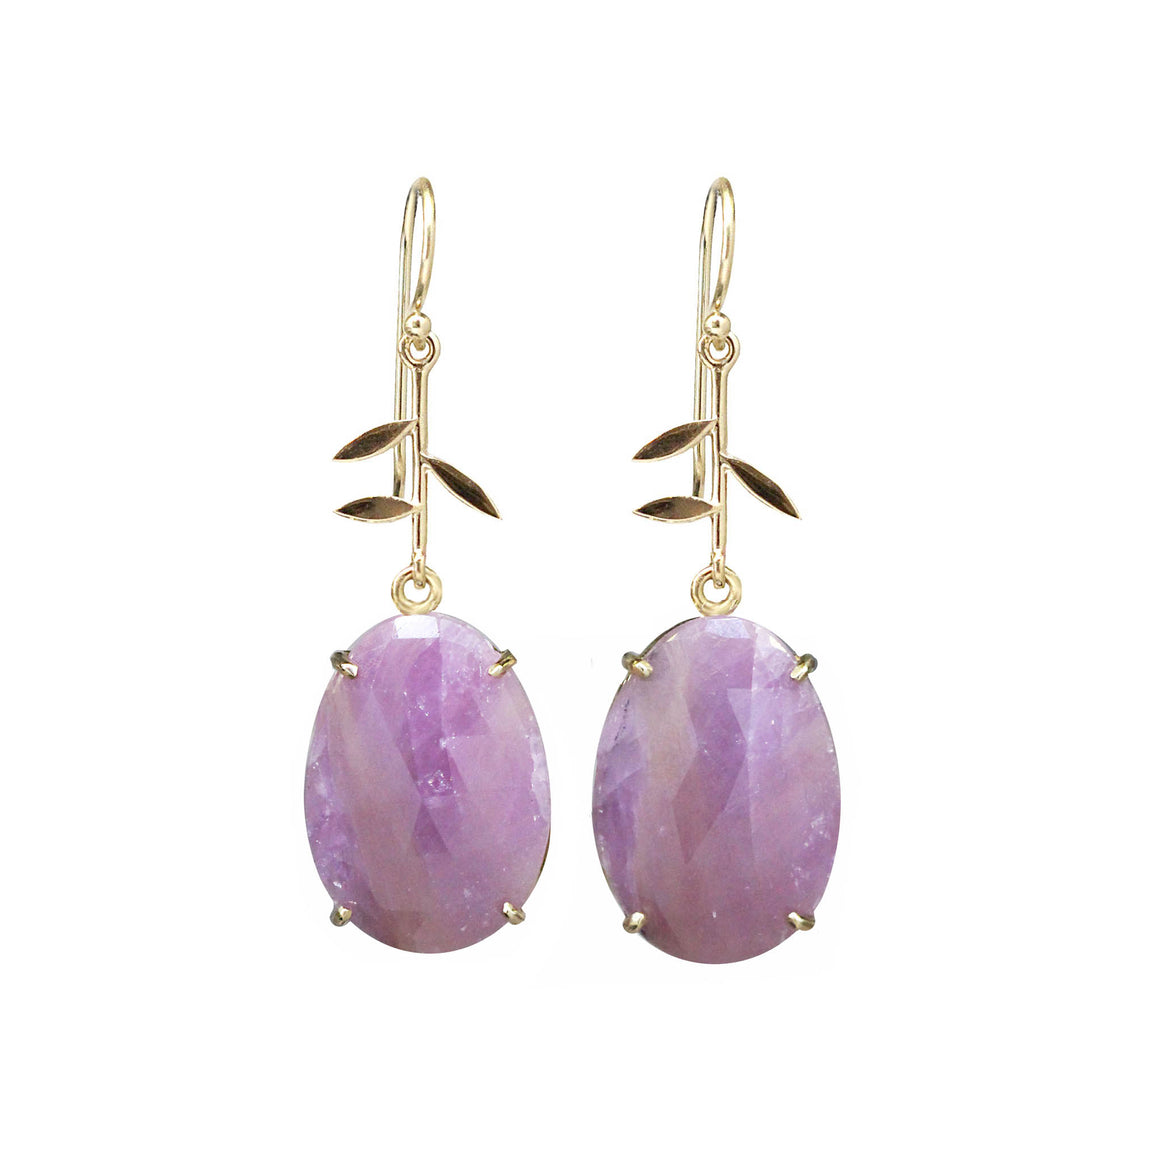 LONG DROP EARRINGS WITH LARGE OVAL PALE PINK SAPPHIRES